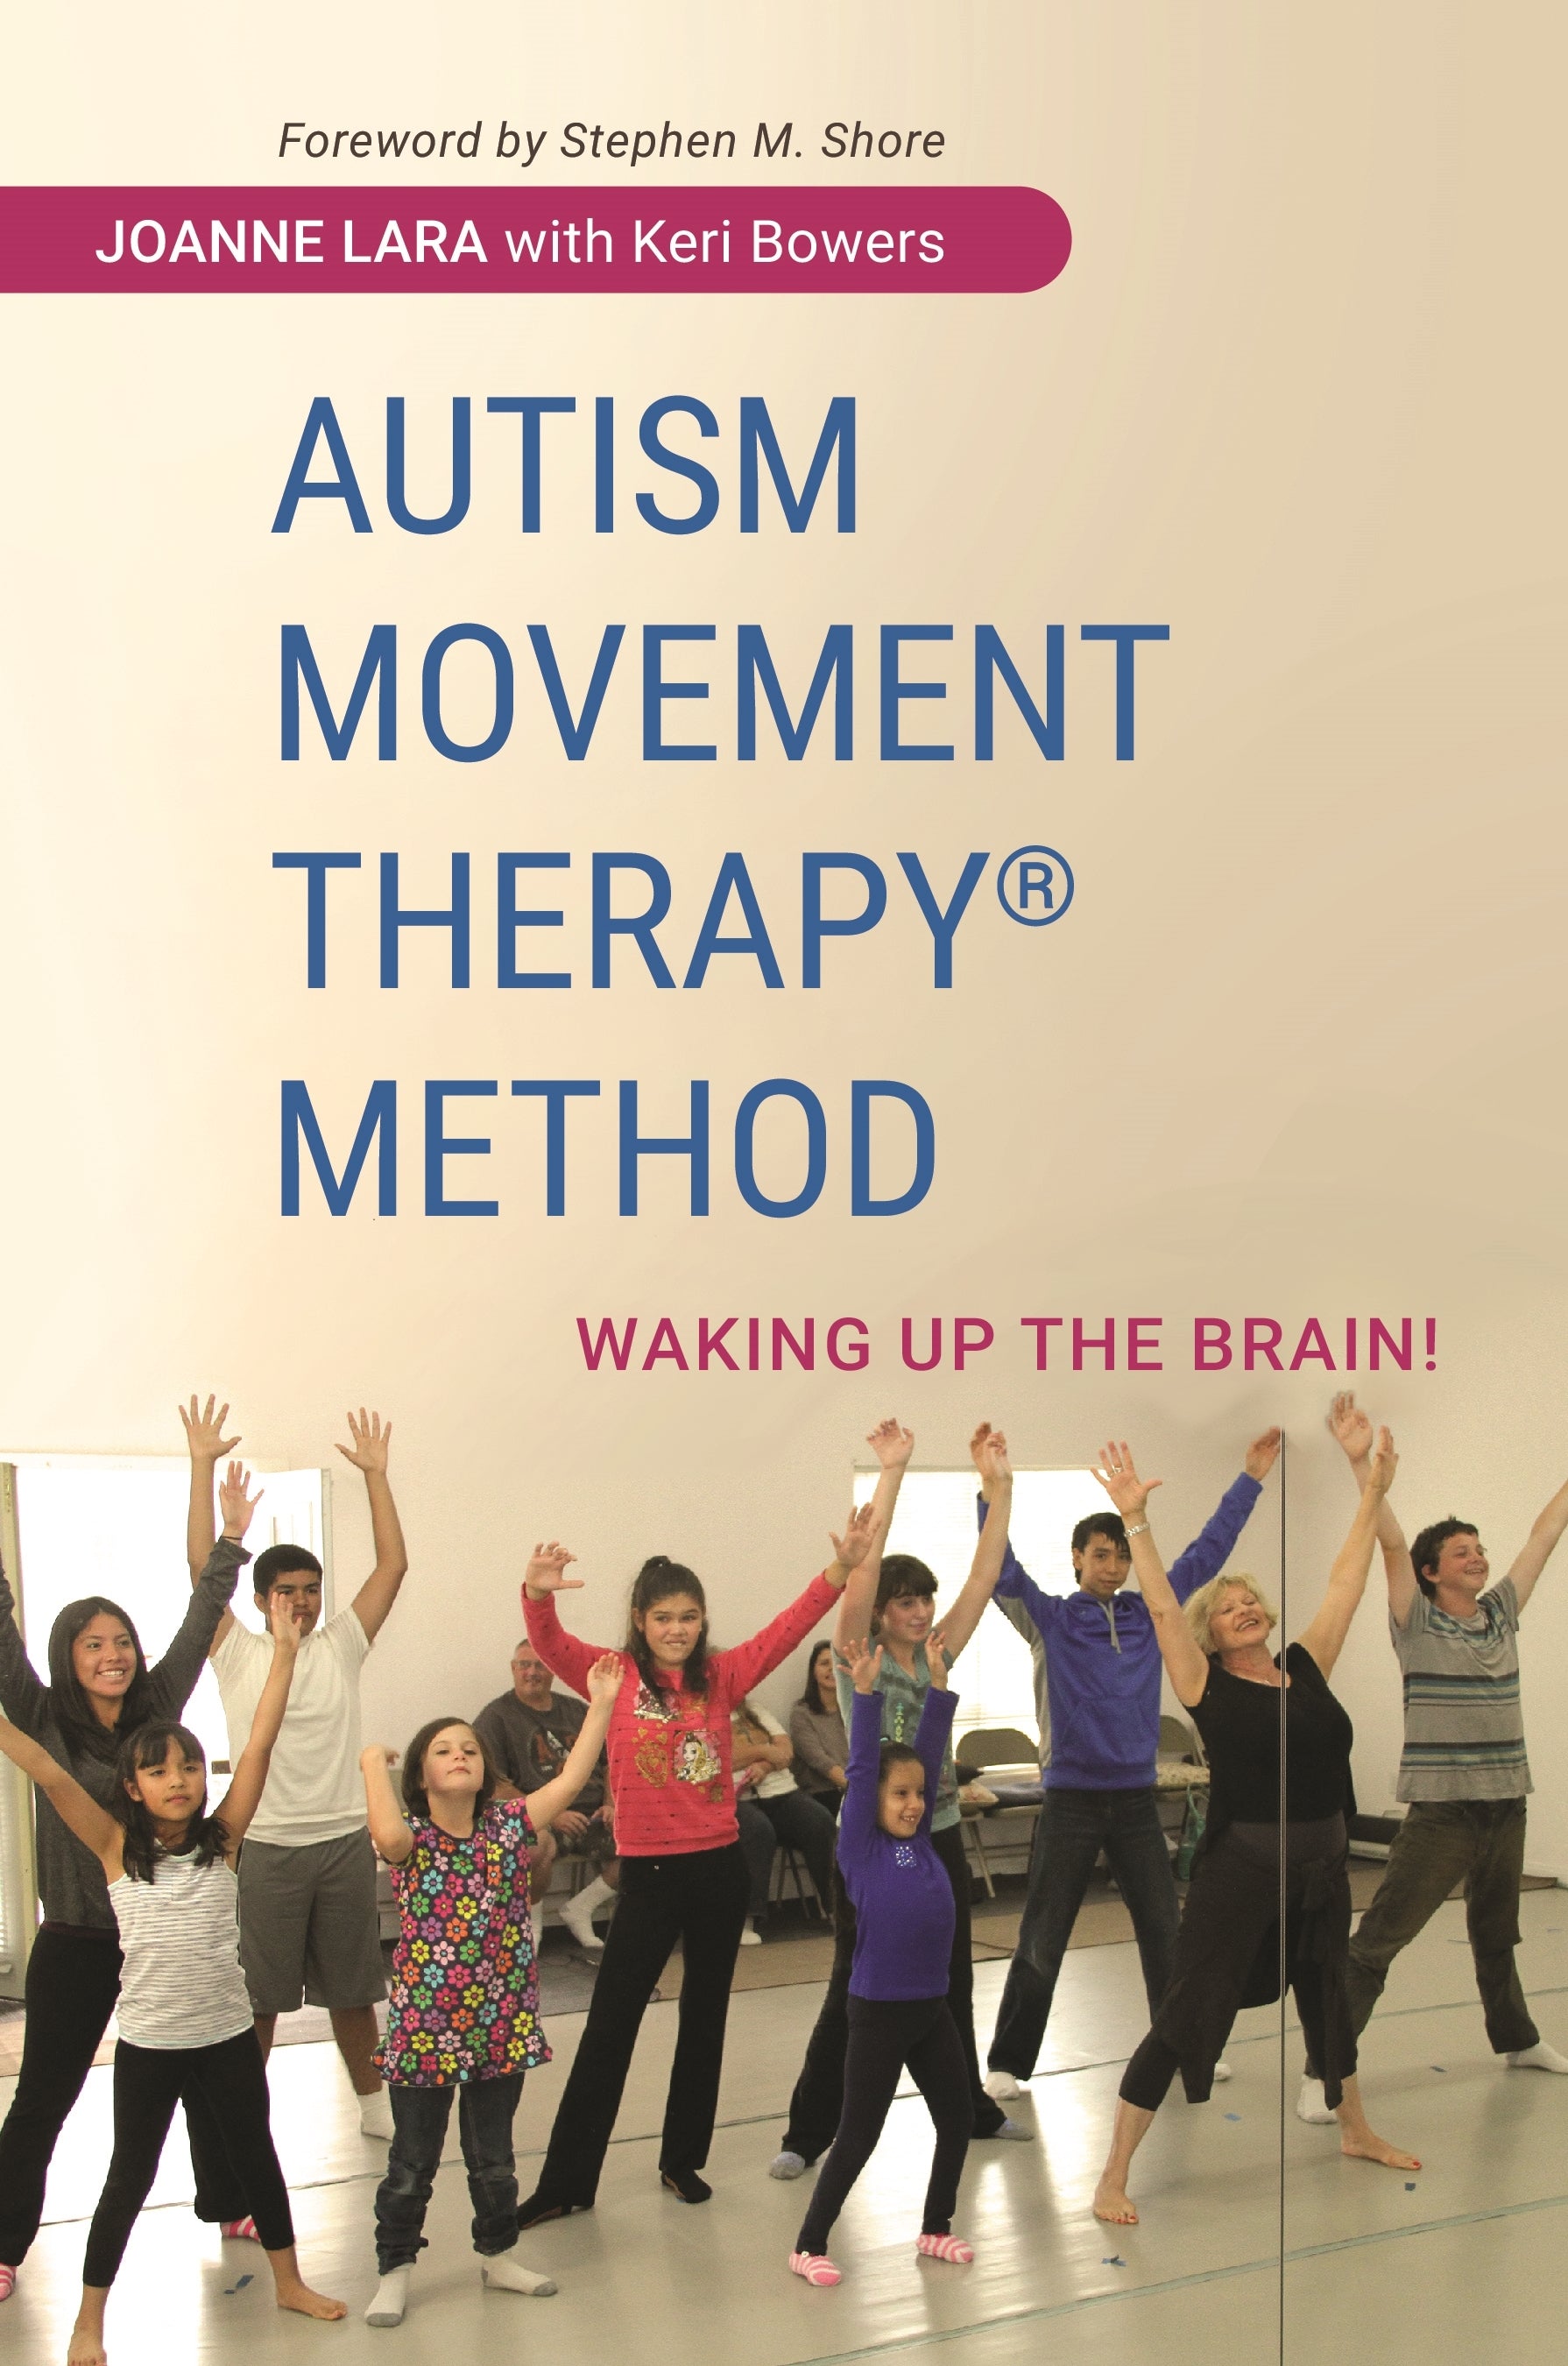 Autism Movement Therapy (R) Method by Joanne Lara, Stephen M. Shore